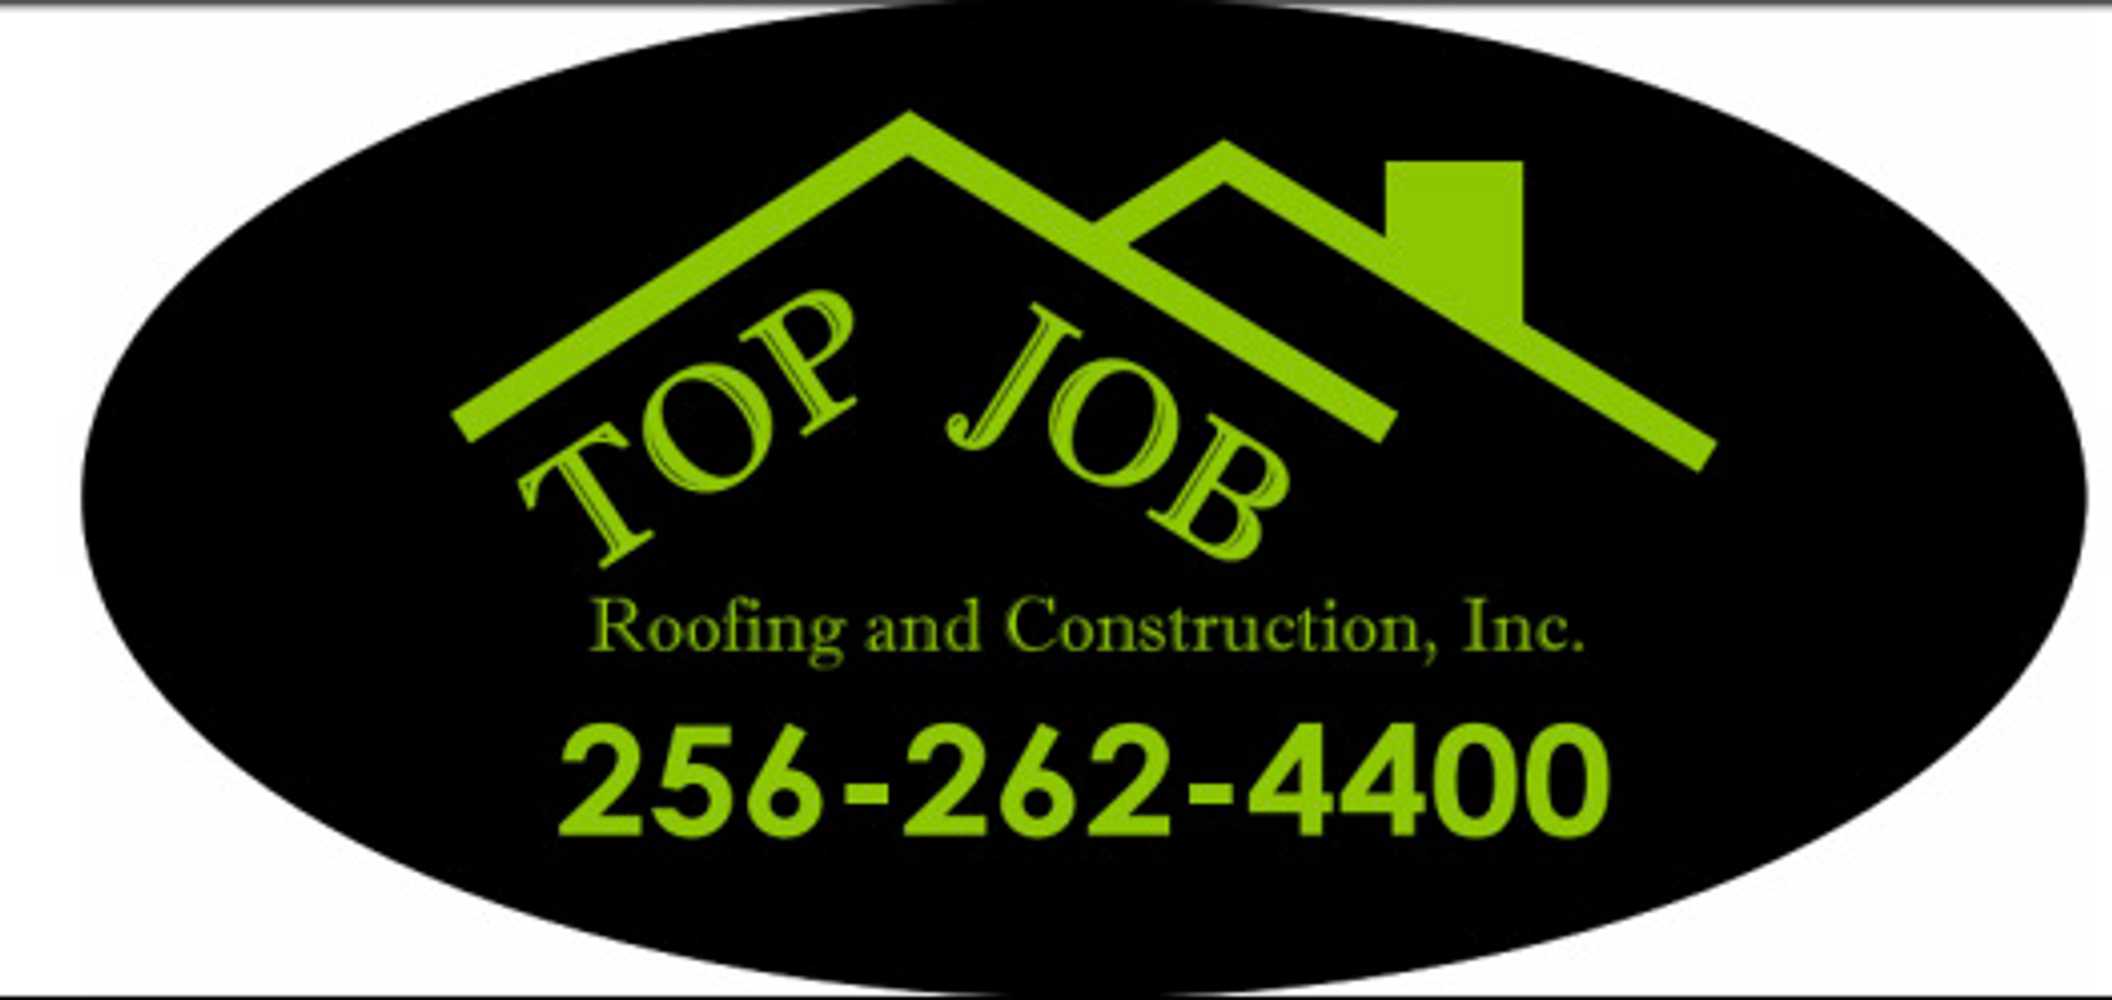 Photo(s) from Top Job Roofing & Construction, Inc.